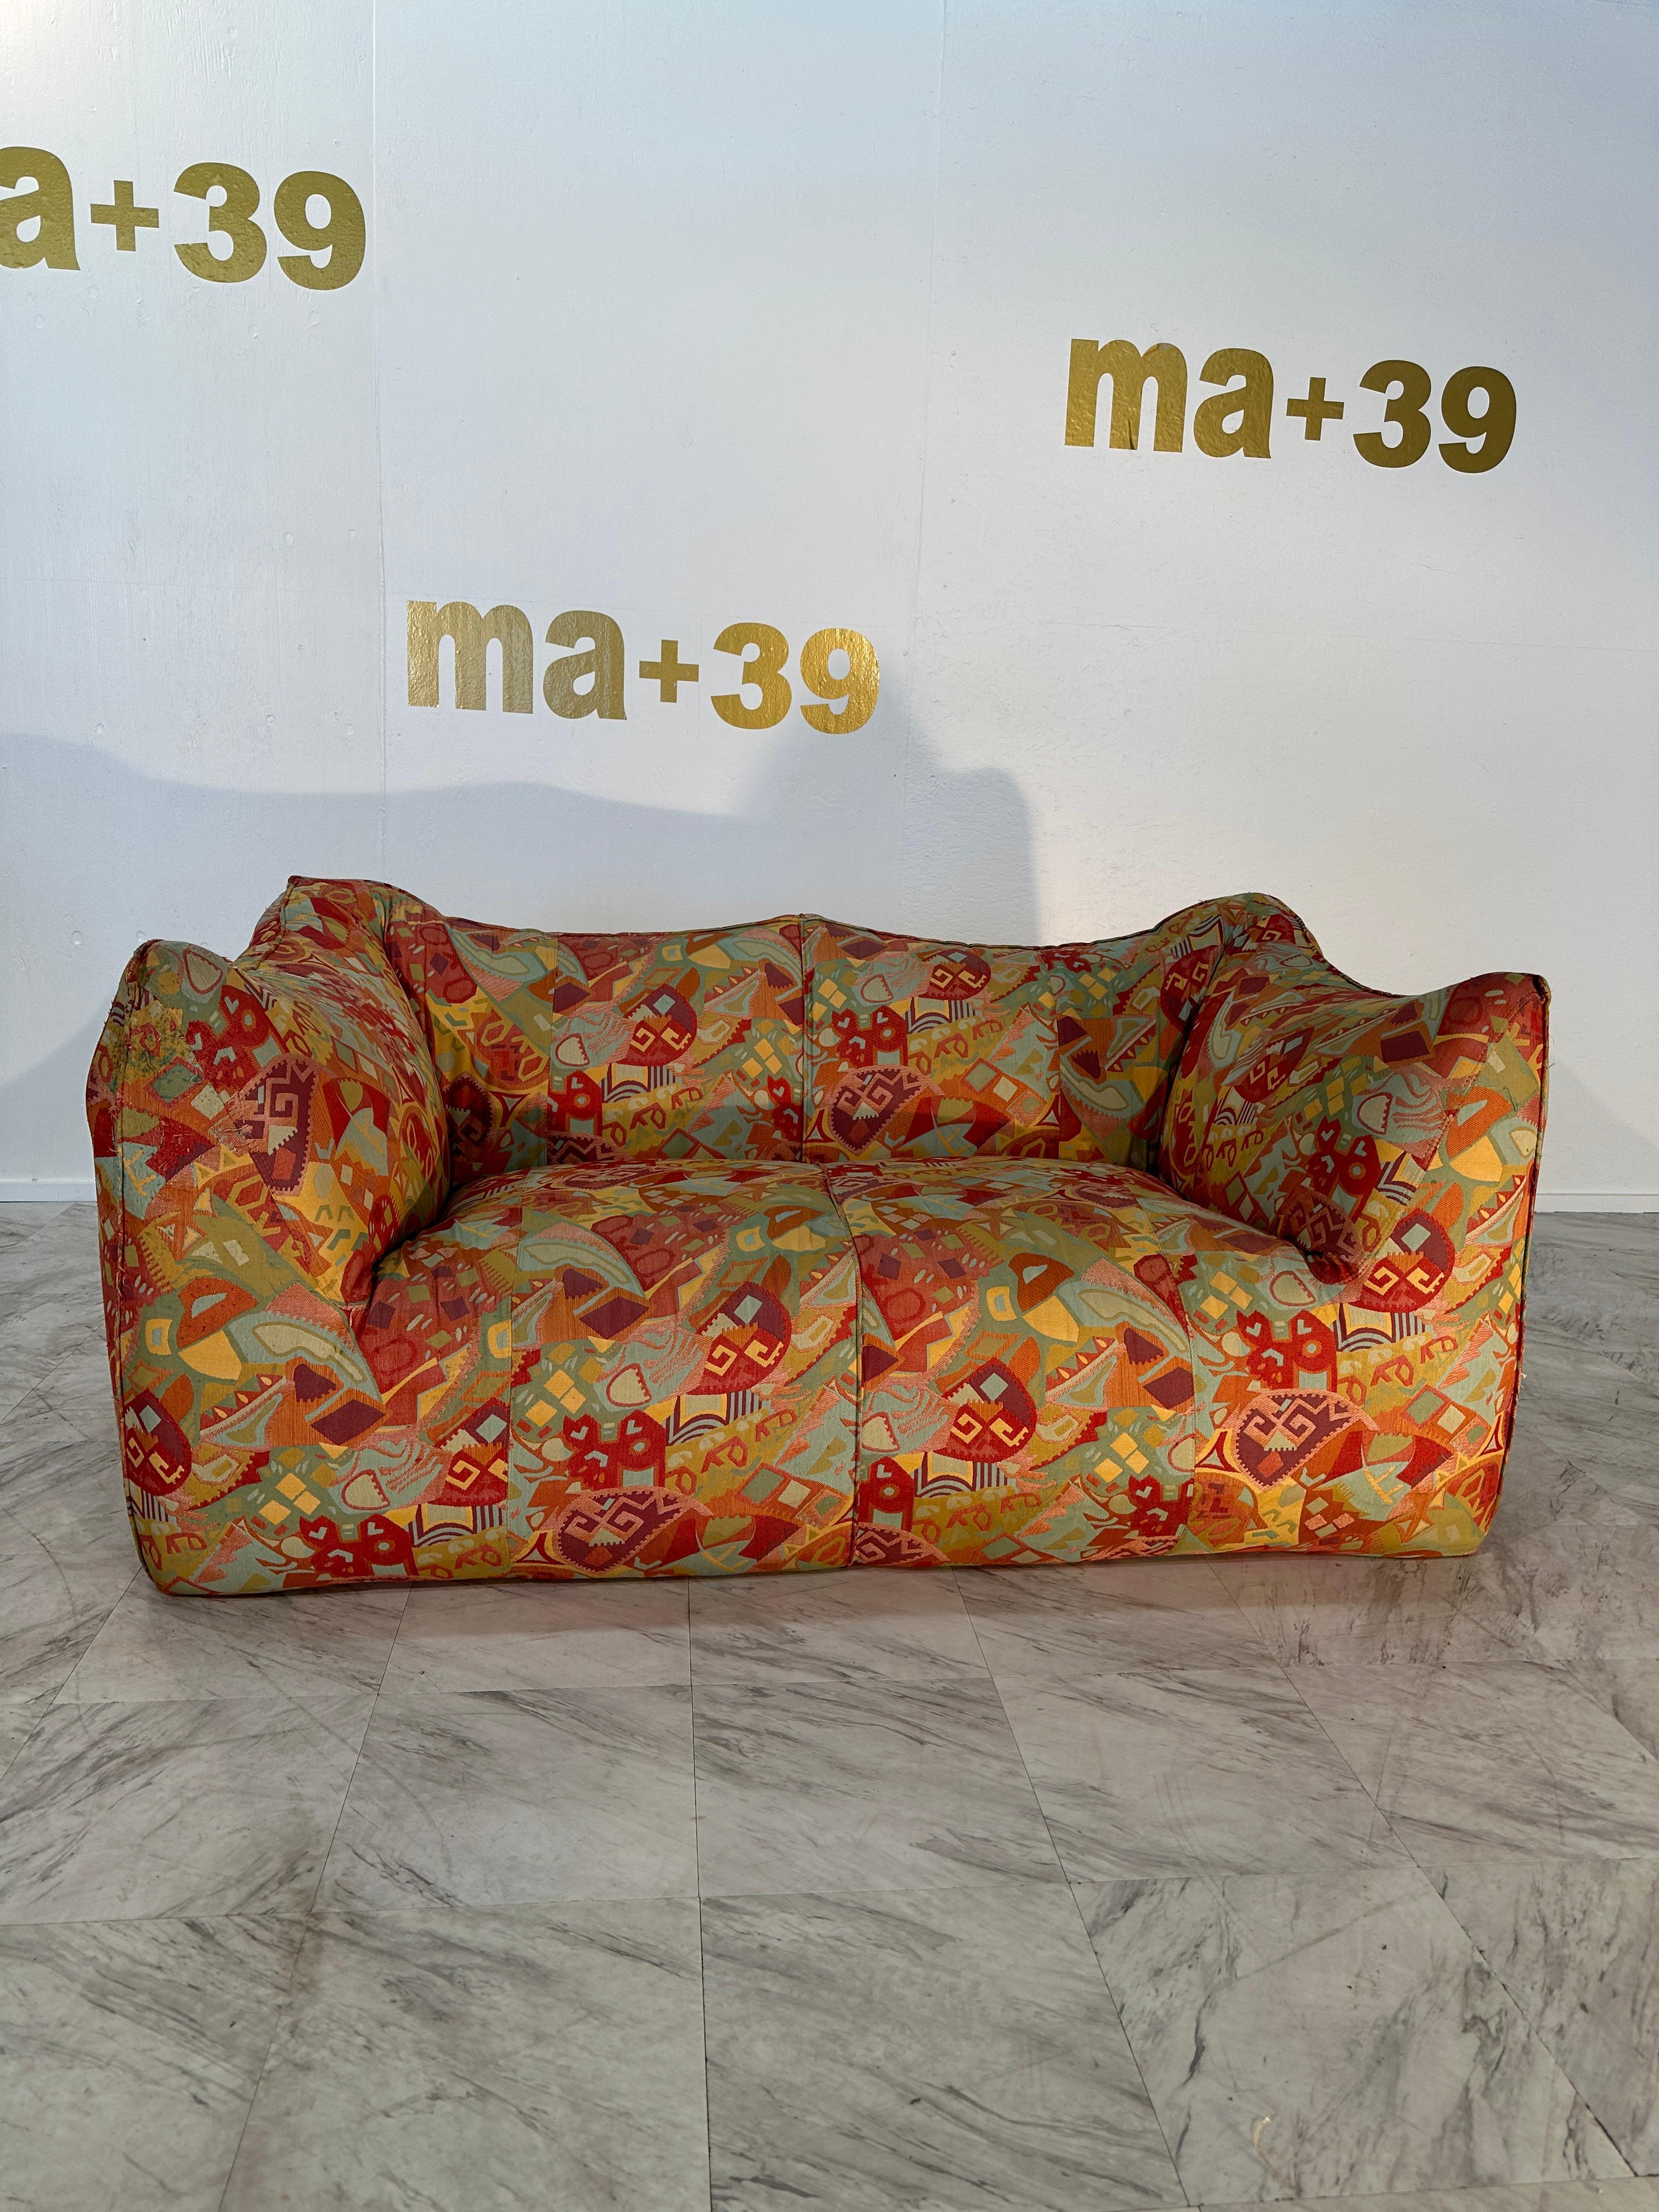 This comfortable Flowers fabric settee is bulky and playful, shaped as if it is merely a large cushion and the accompanying feeling is the same. It is designed by Mario Bellini and was the culmination of research into stuffed furniture. In the